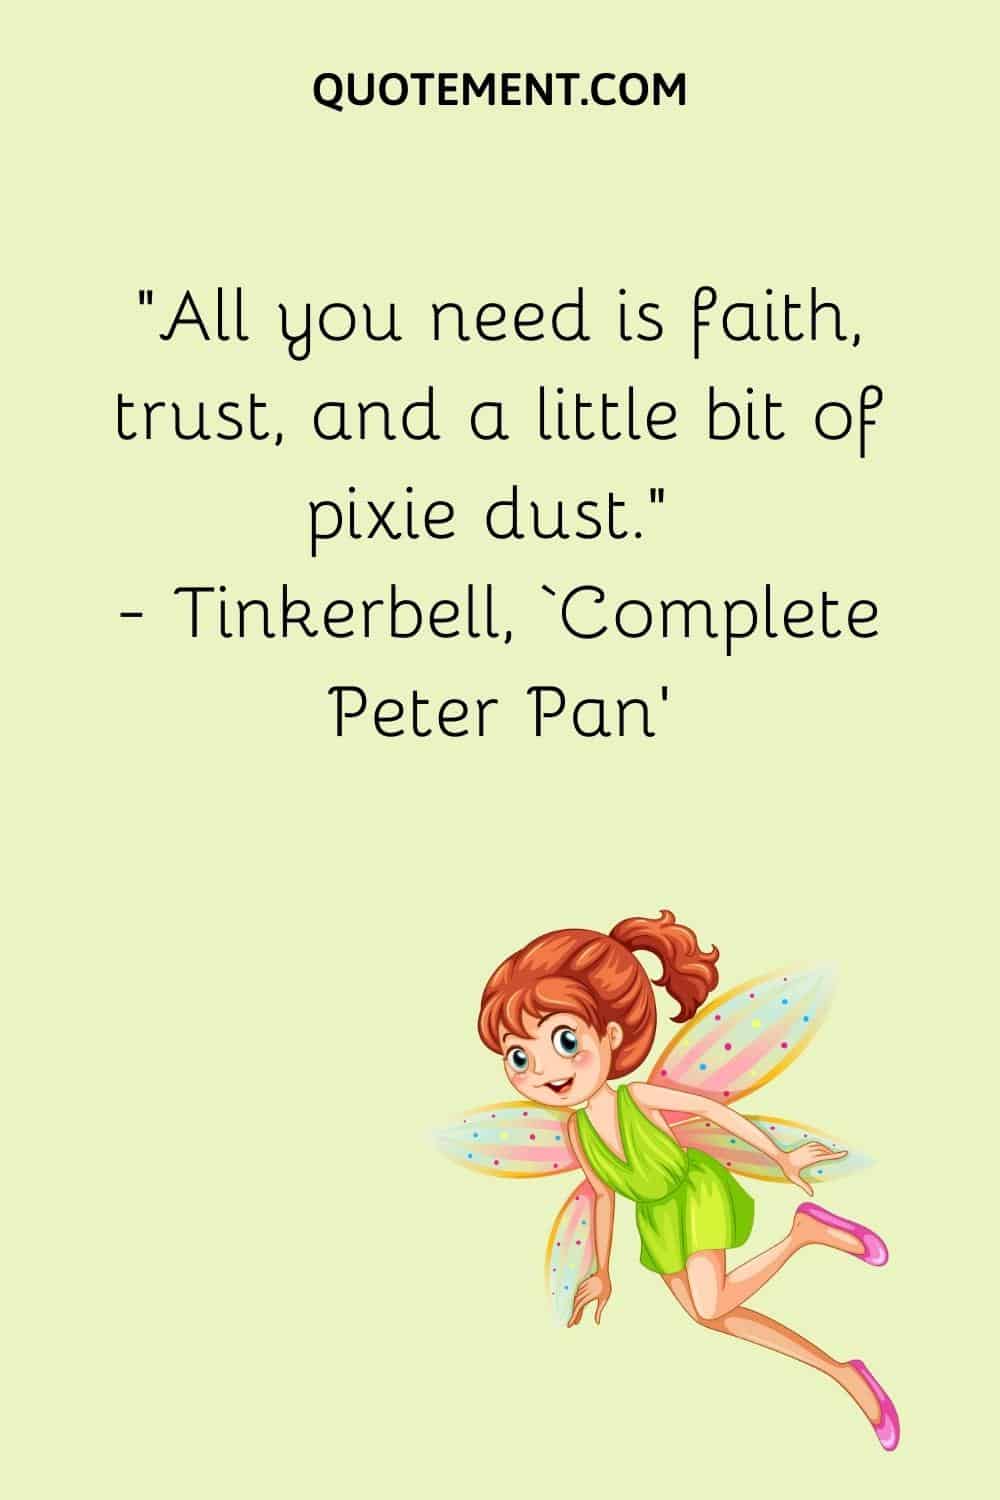 All you need is faith, trust, and a little bit of pixie dust